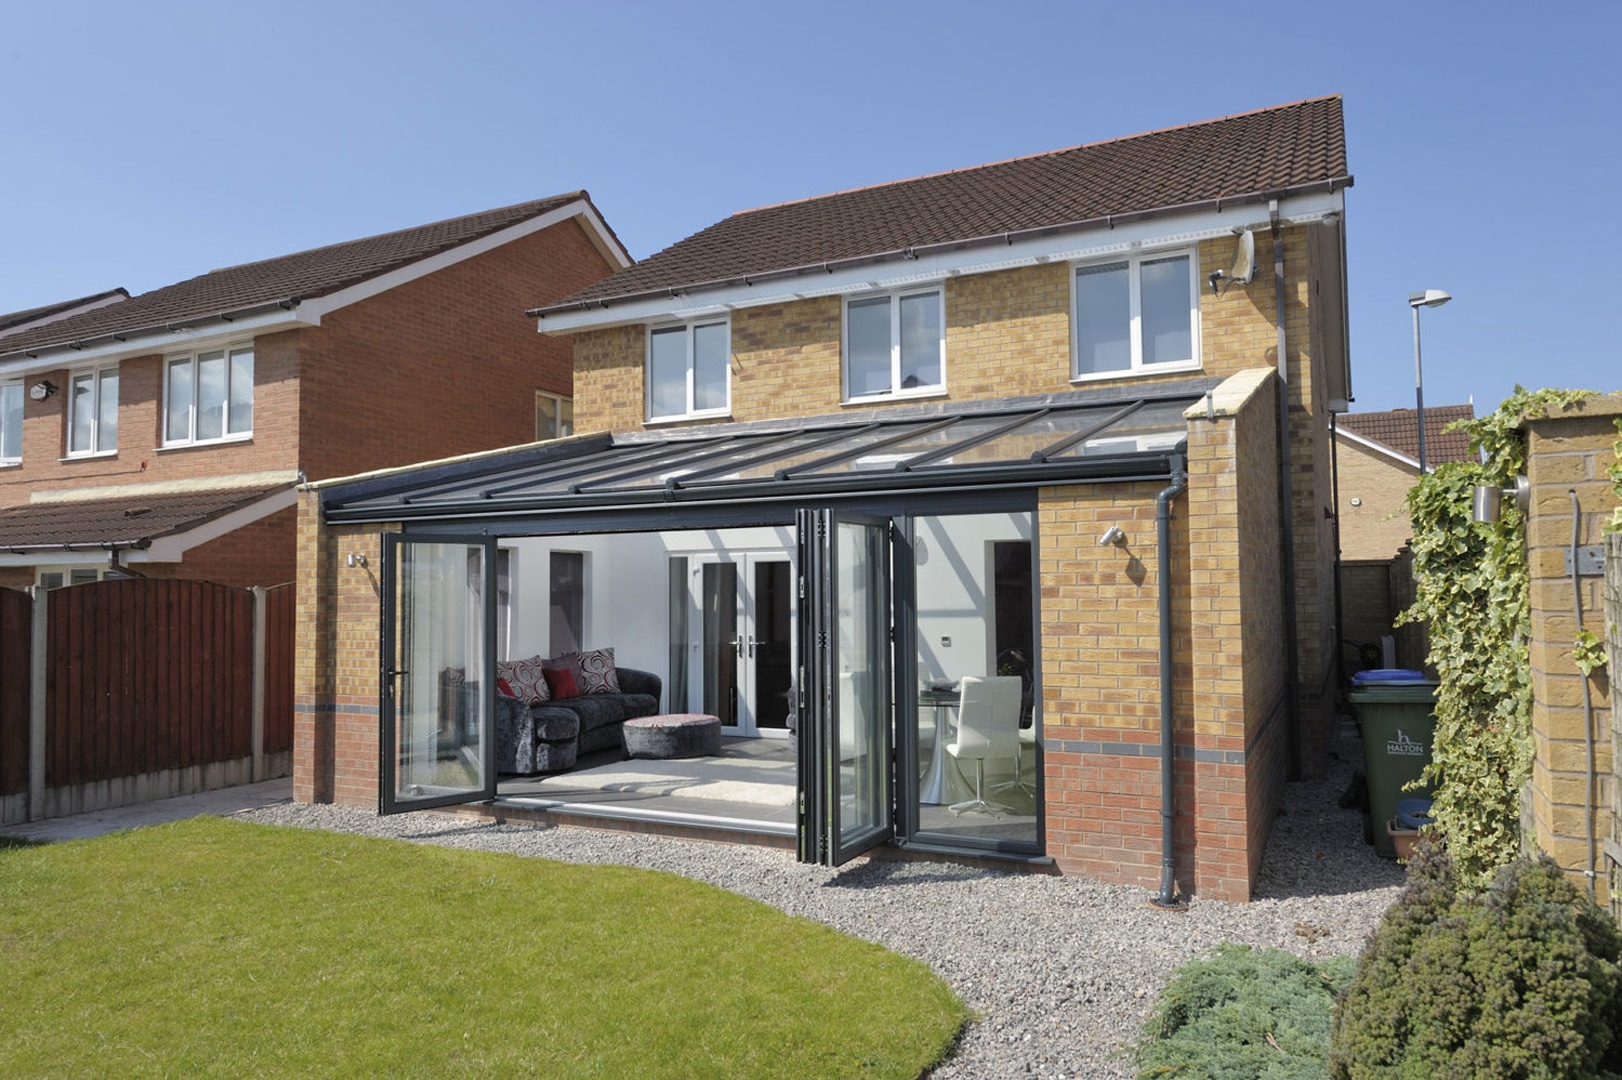 Contemporary lean-to conservatory showcasing sleek lines and large glass windows, providing a bright and airy space that seamlessly extends from the home into the garden, enhancing the property's modern aesthetic.